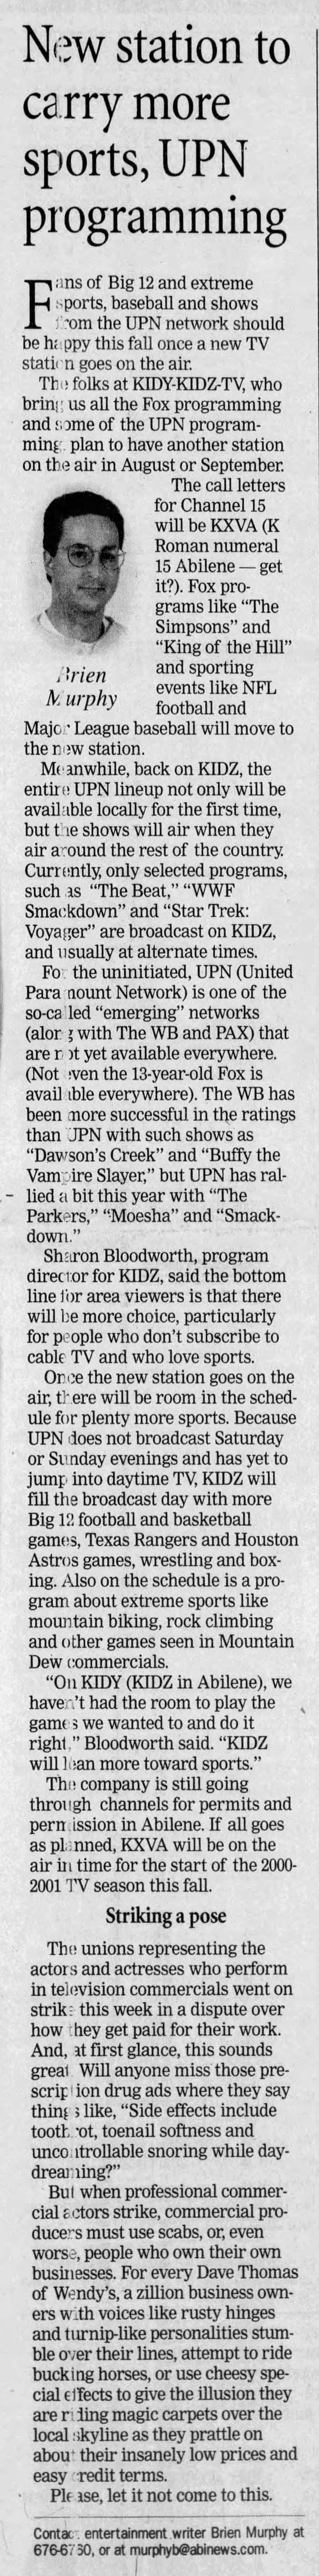 New station to carry more sports, UPN programming